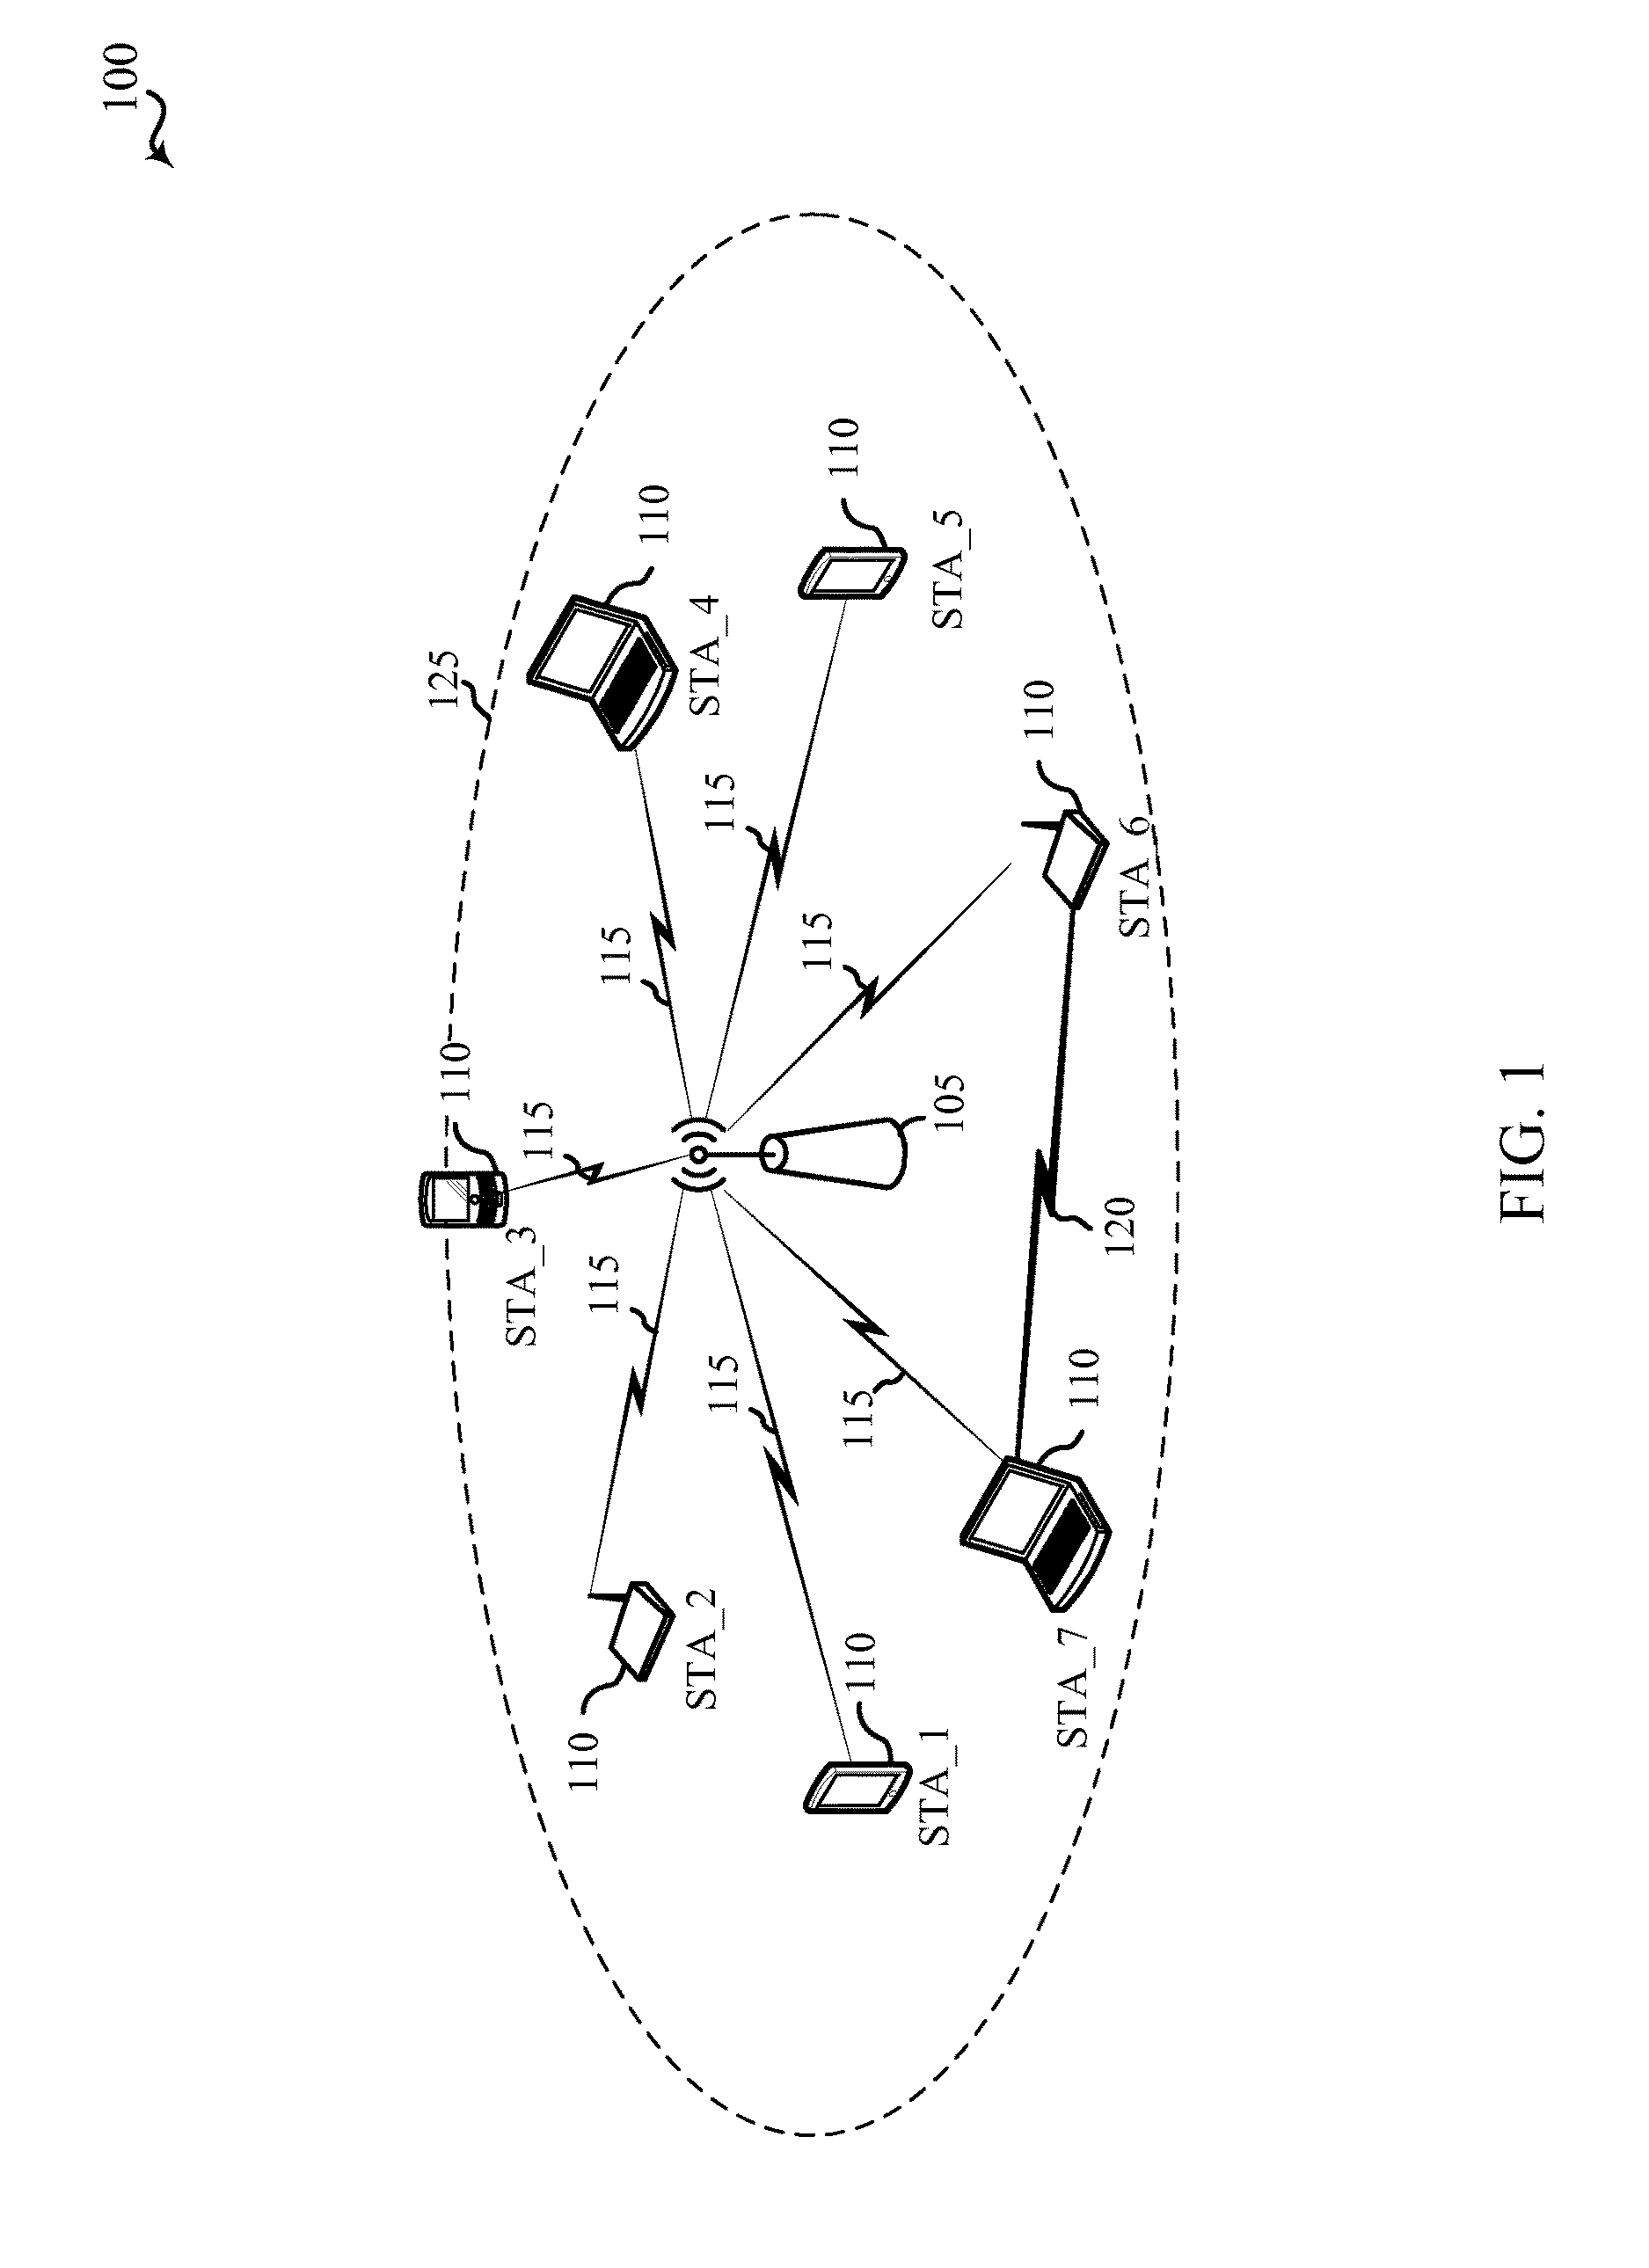 Congestion based roaming in a wireless local area network